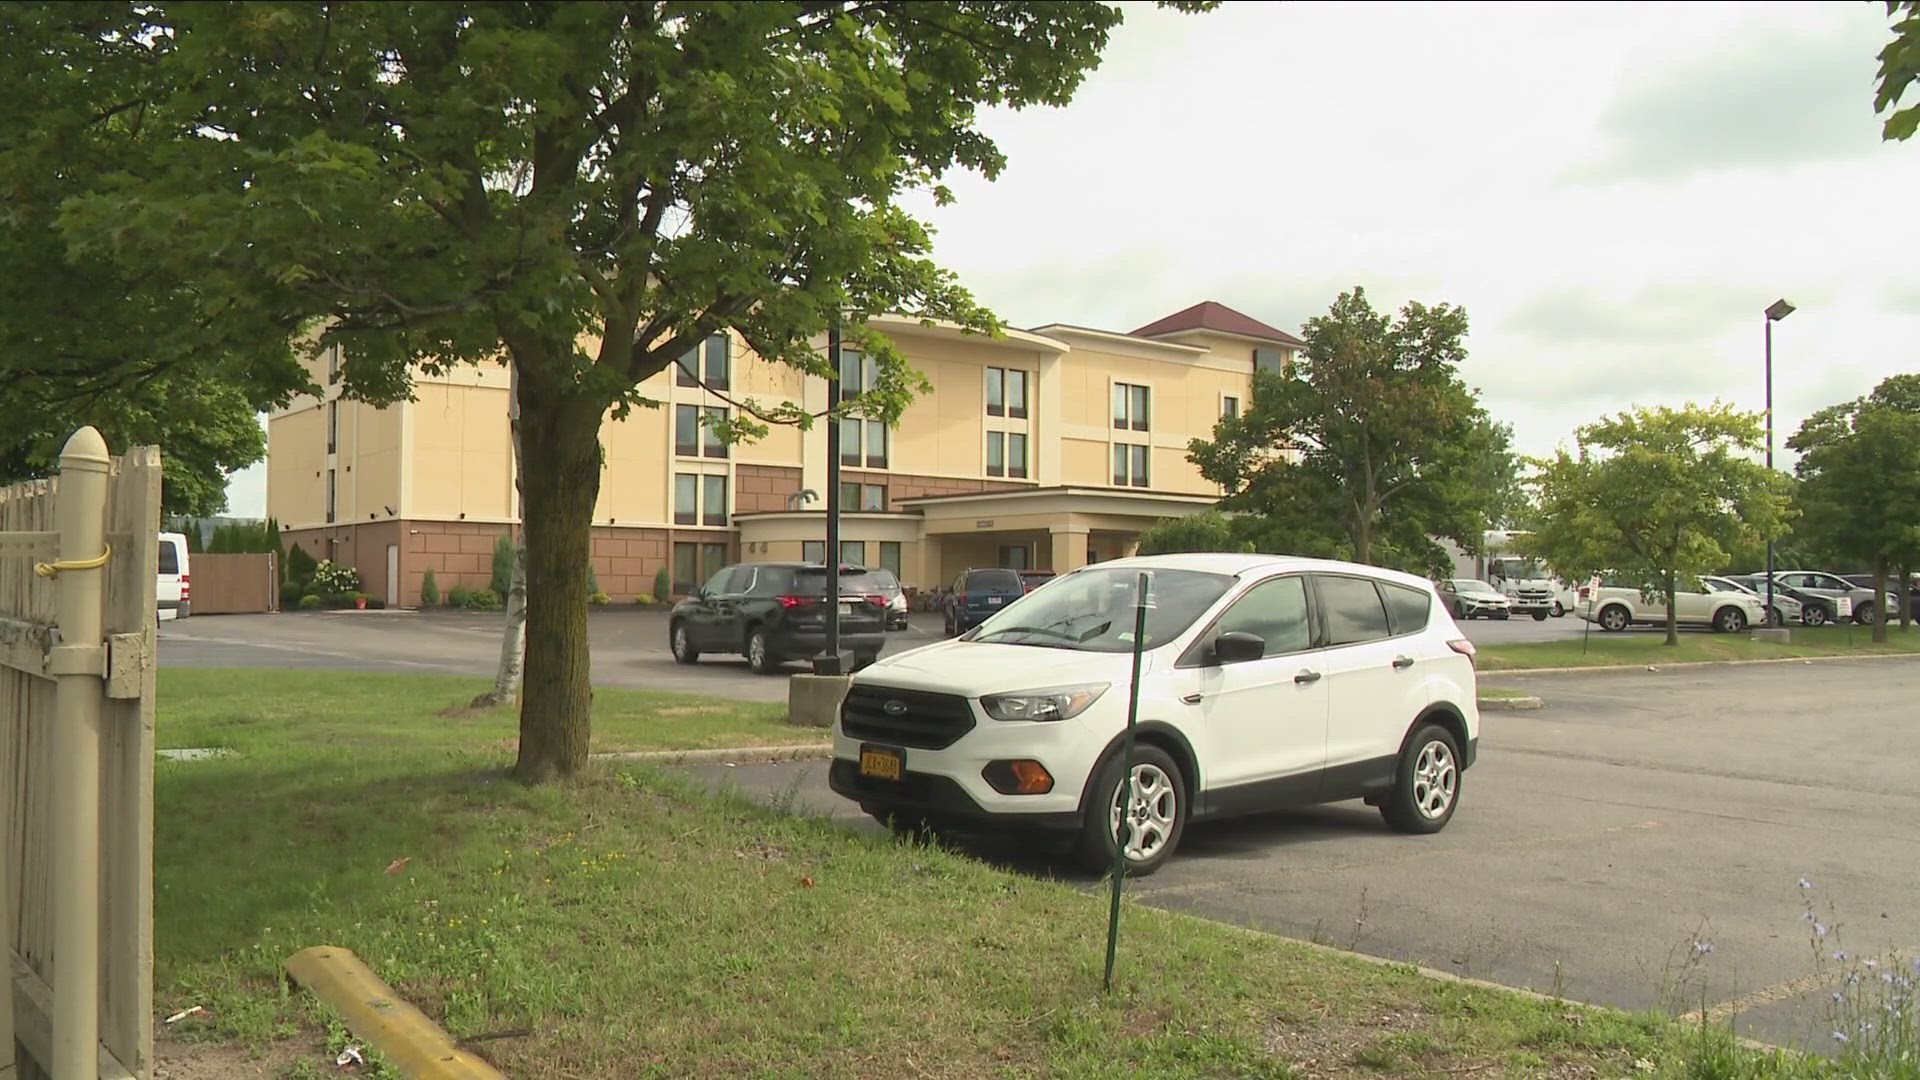 the agreement stipulates that all migrants will be moved out of the best western galleria hotel on dingens street within a week, and no more will be placed there.